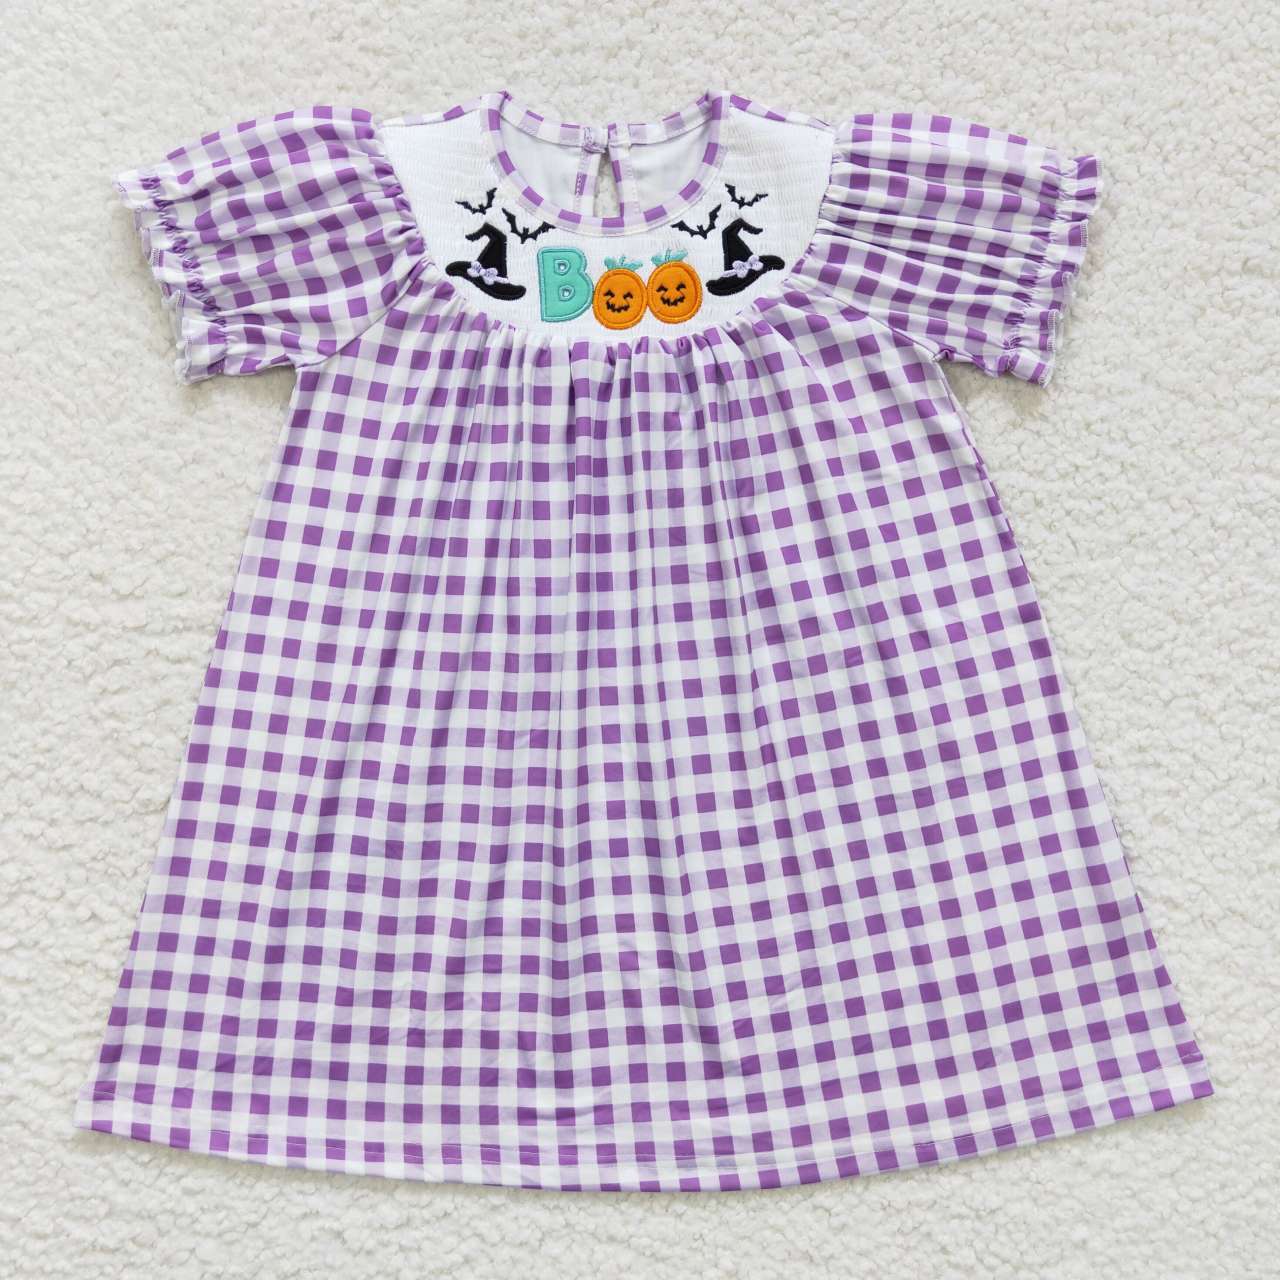 GSD0468 BOO witch hat purple plaid embroidery print girls knee length smocked Halloween dress